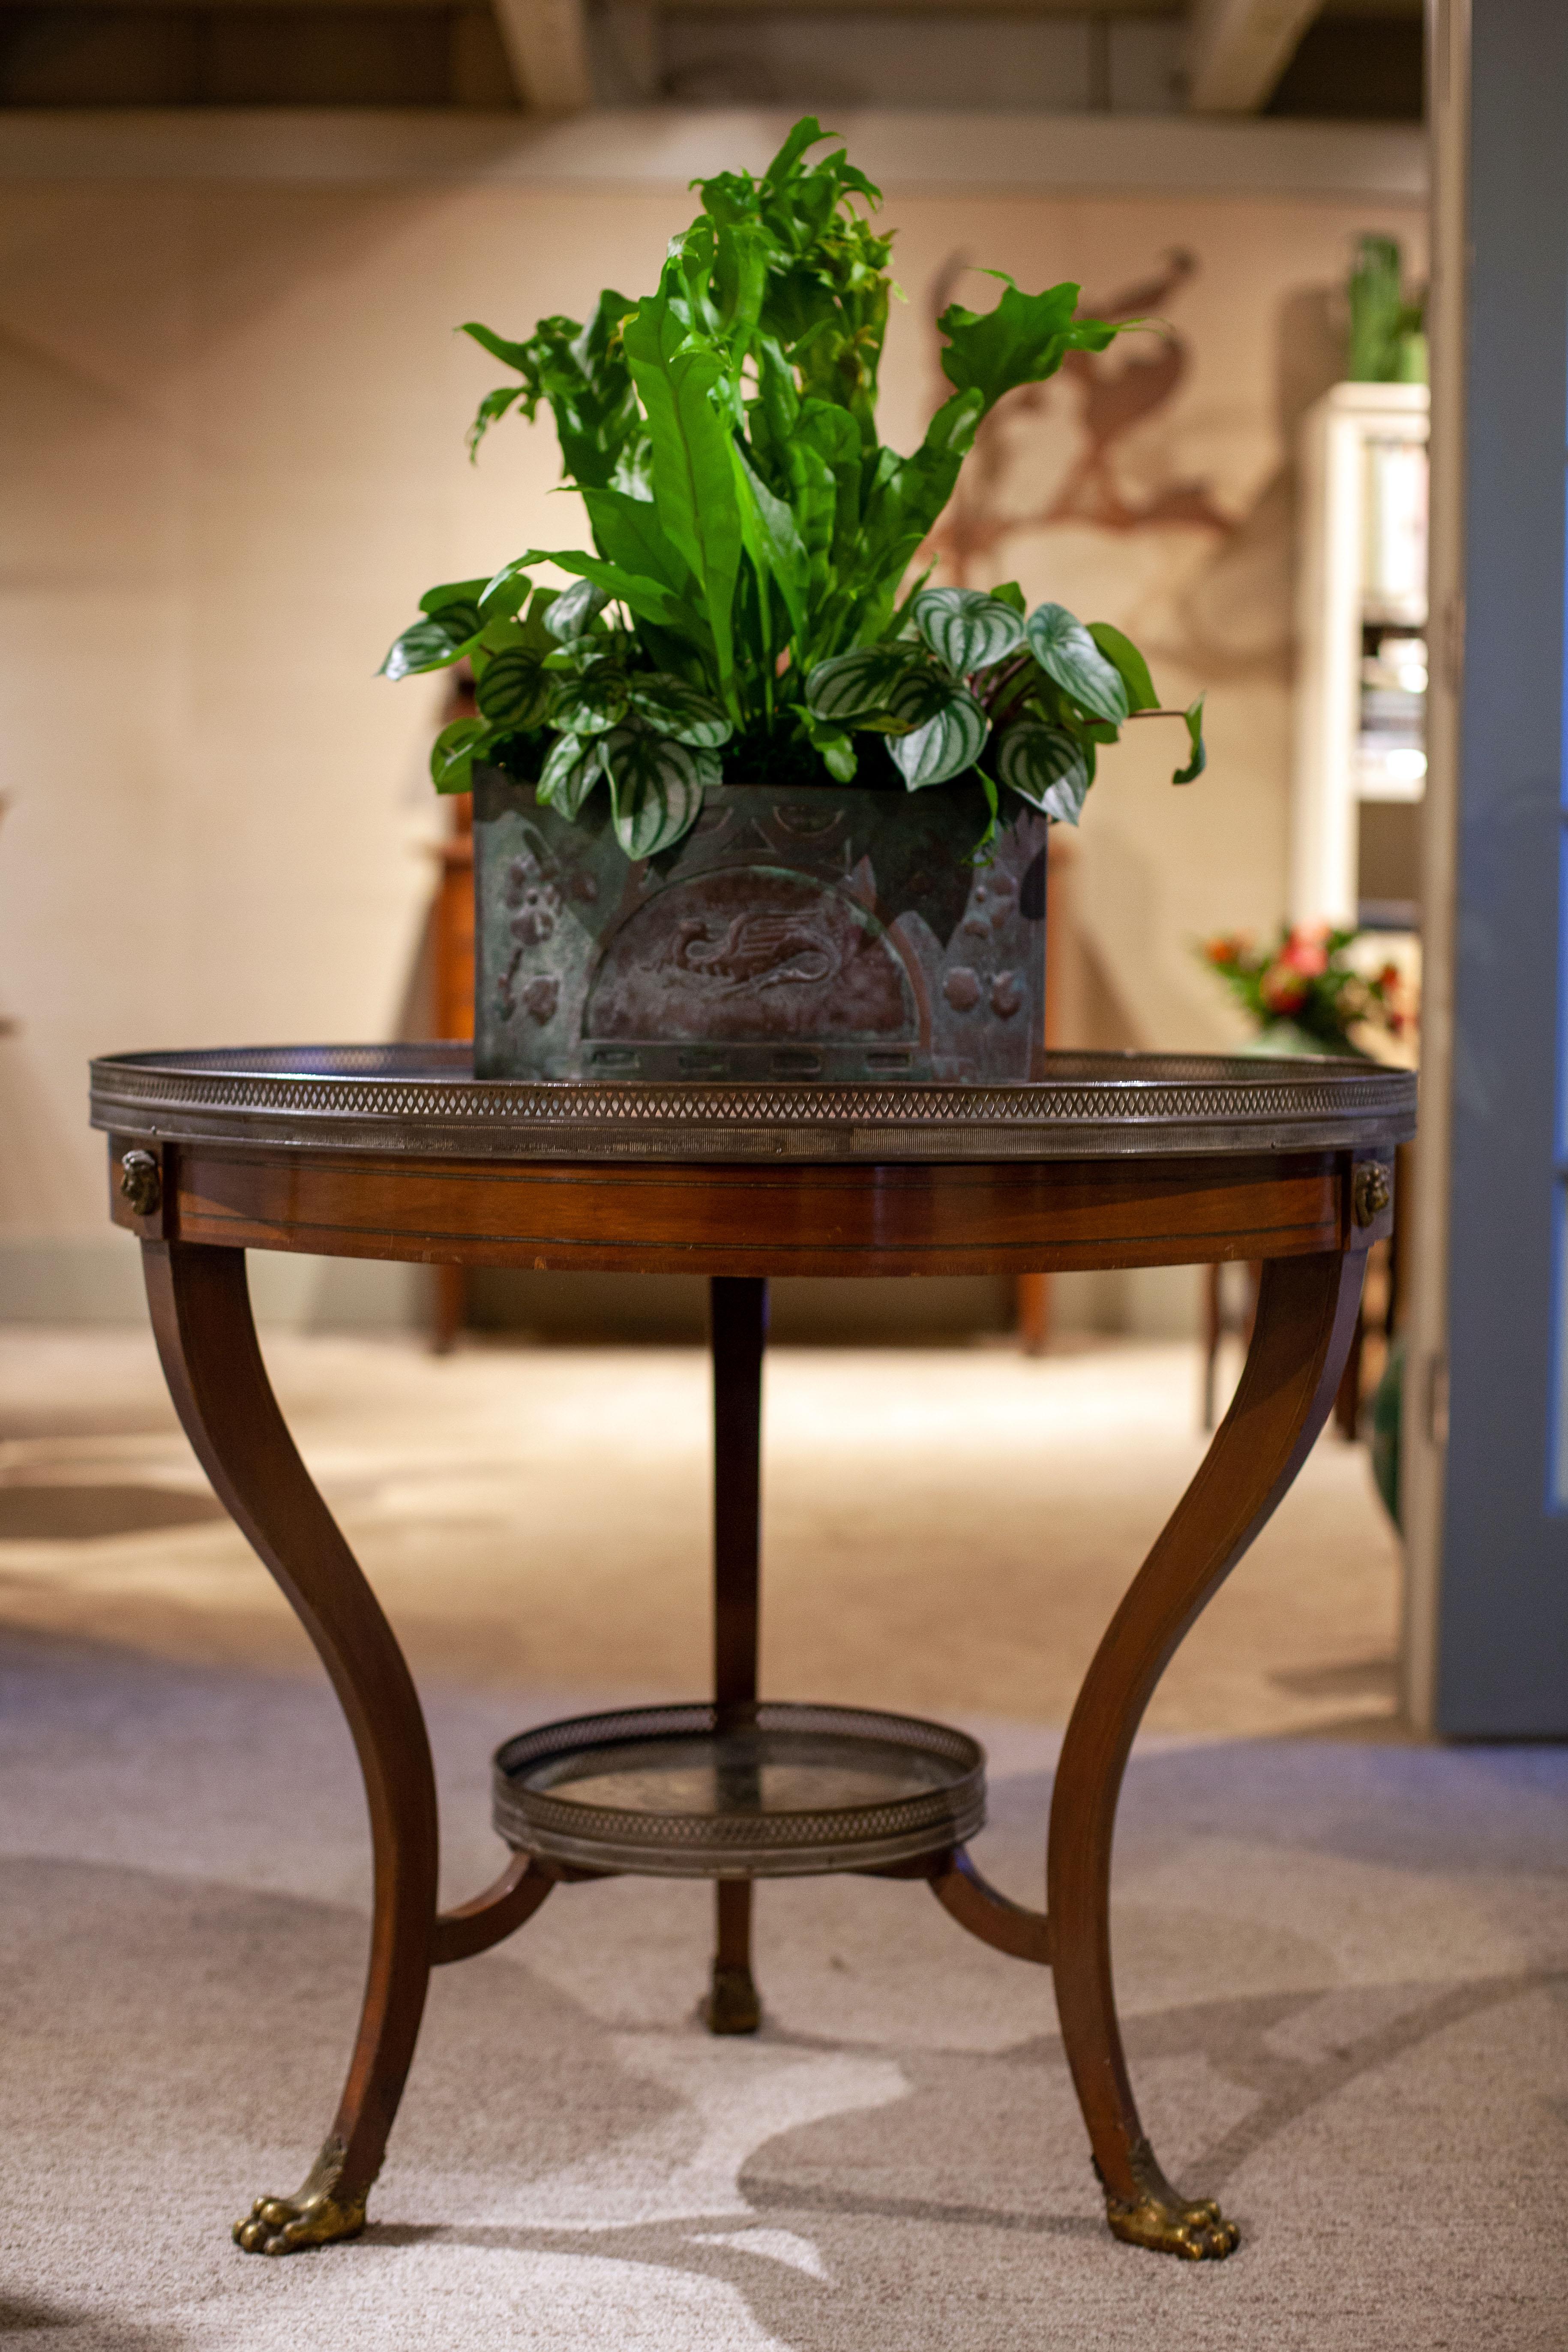 For your consideration, Fleurdetroit presents this marvelous, french table, fresh from a major Detroit estate. The table can be used as a stand-alone lamp table in a foyer or other sitting room, or as a taller tea table for a parlor or library.